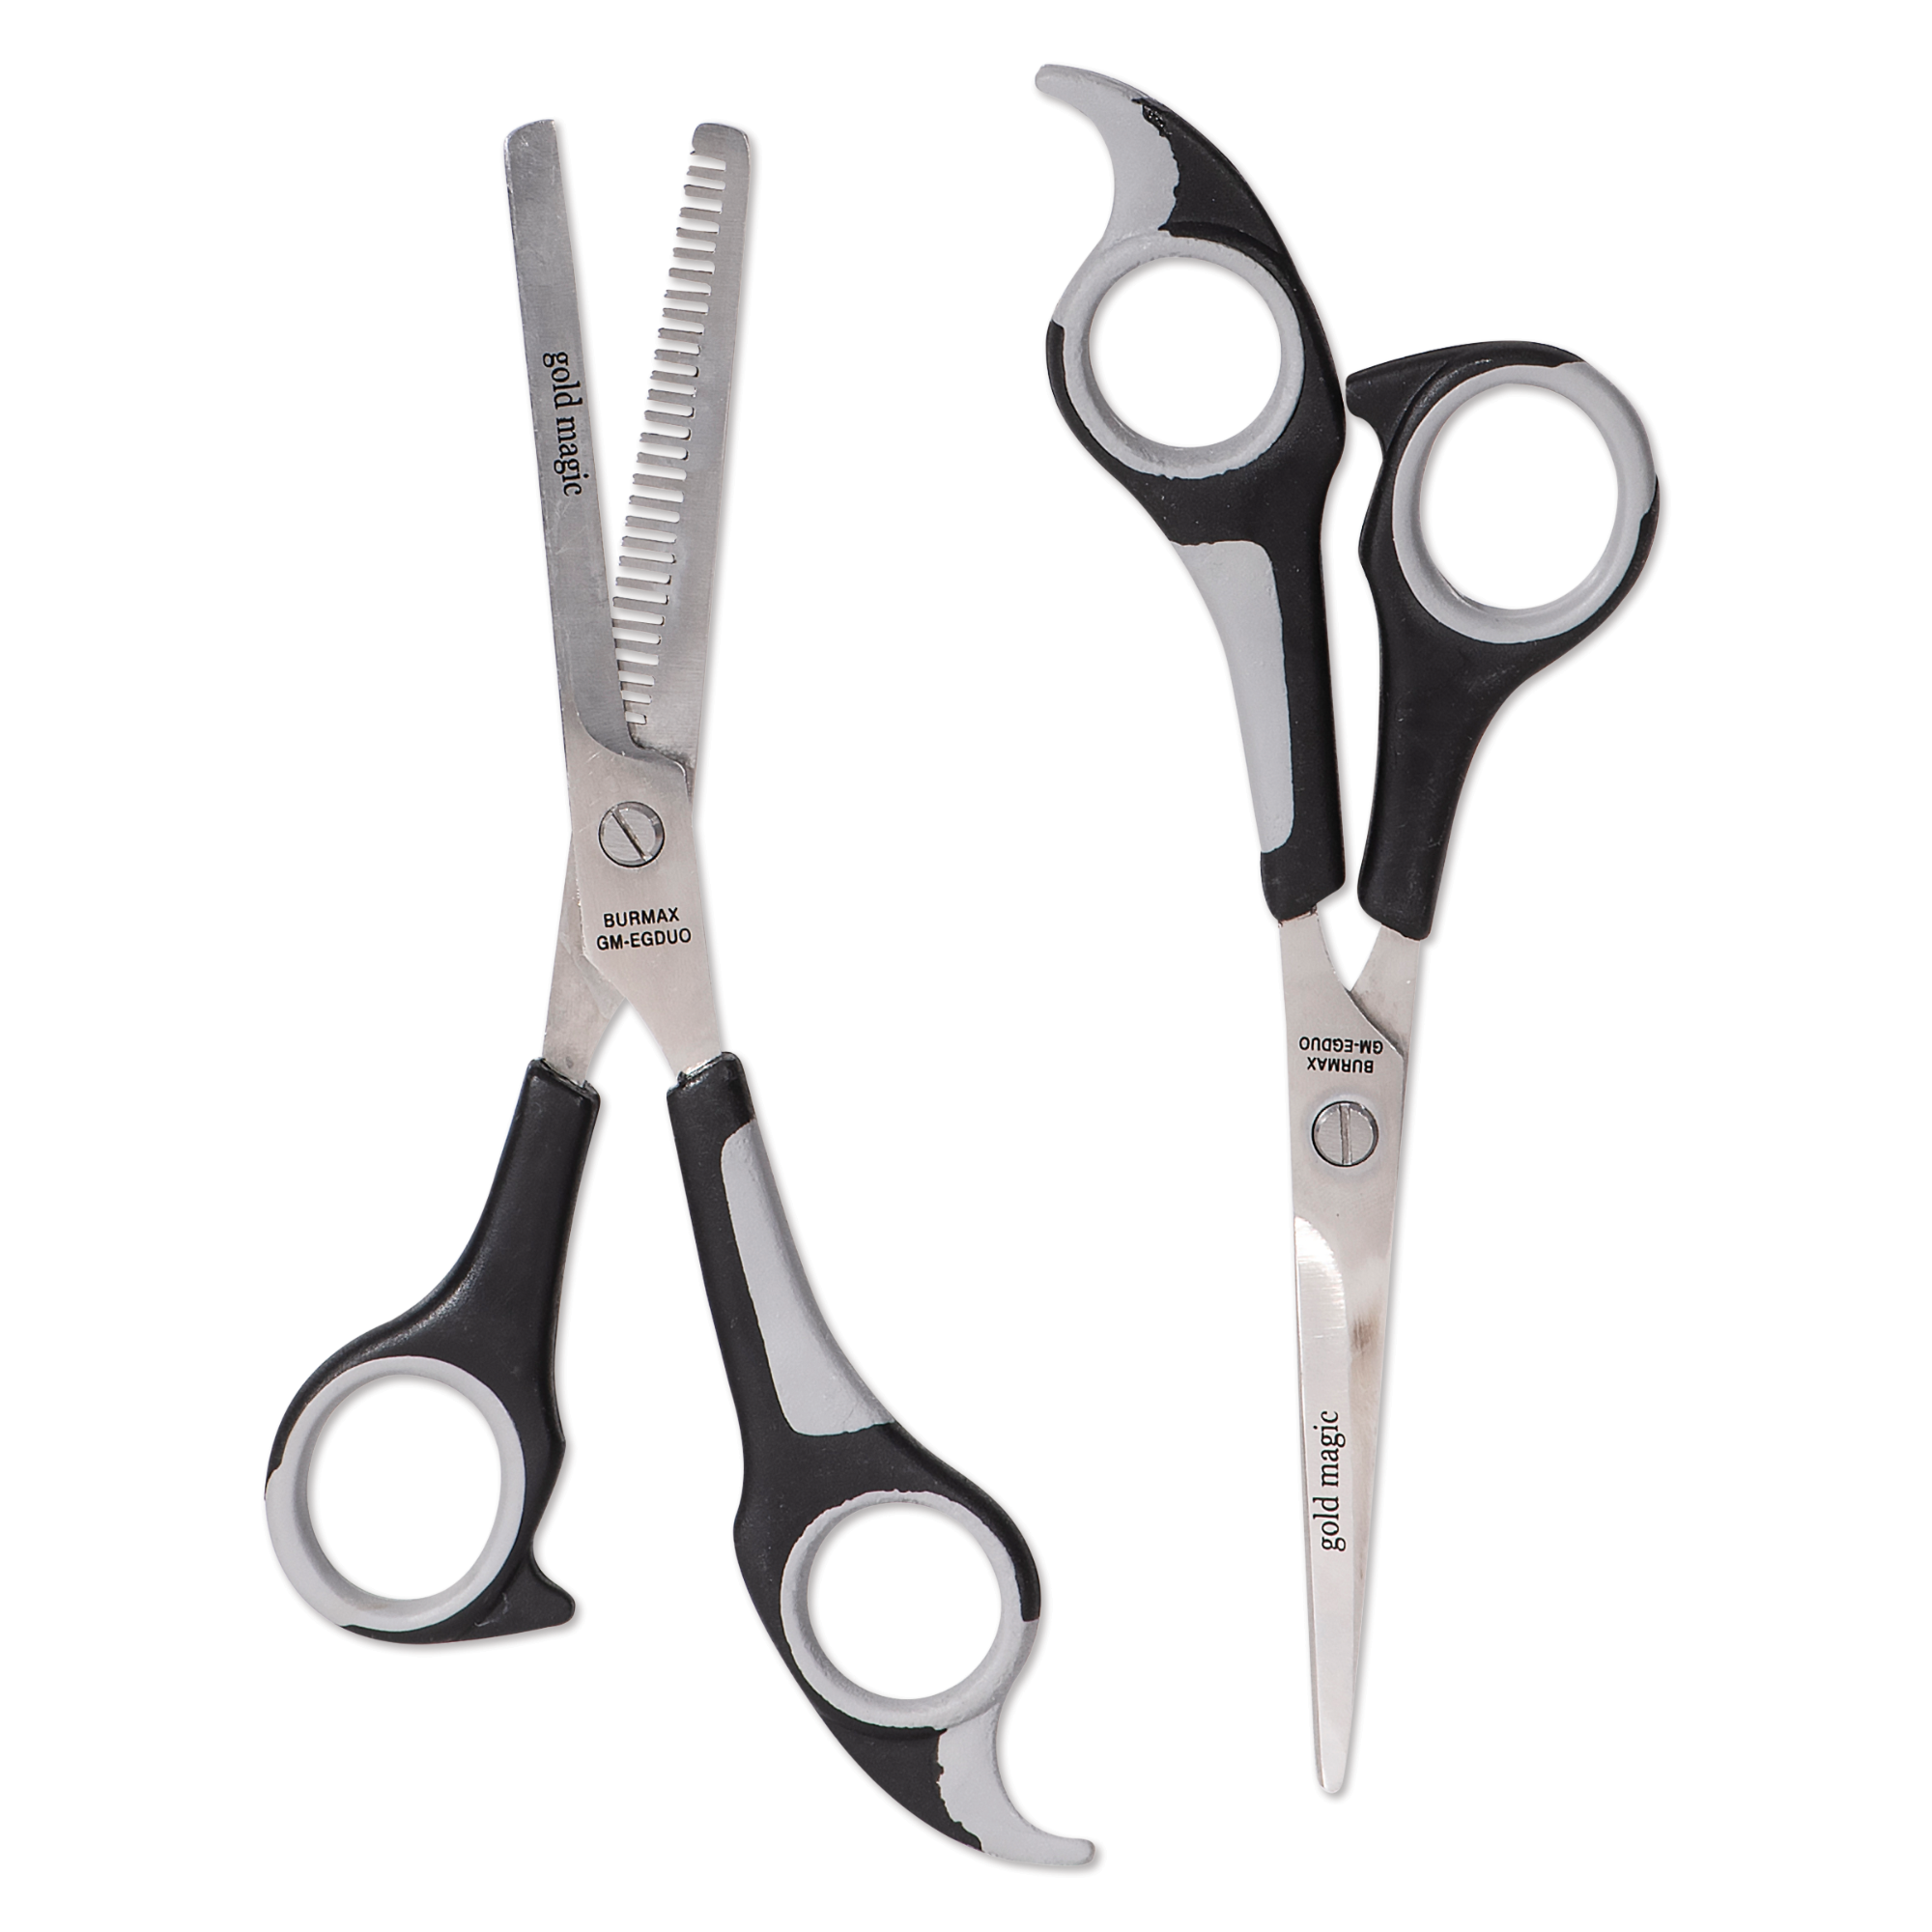 6" Excel Non-Slip Grip Cutting & Thinning Shear Combo